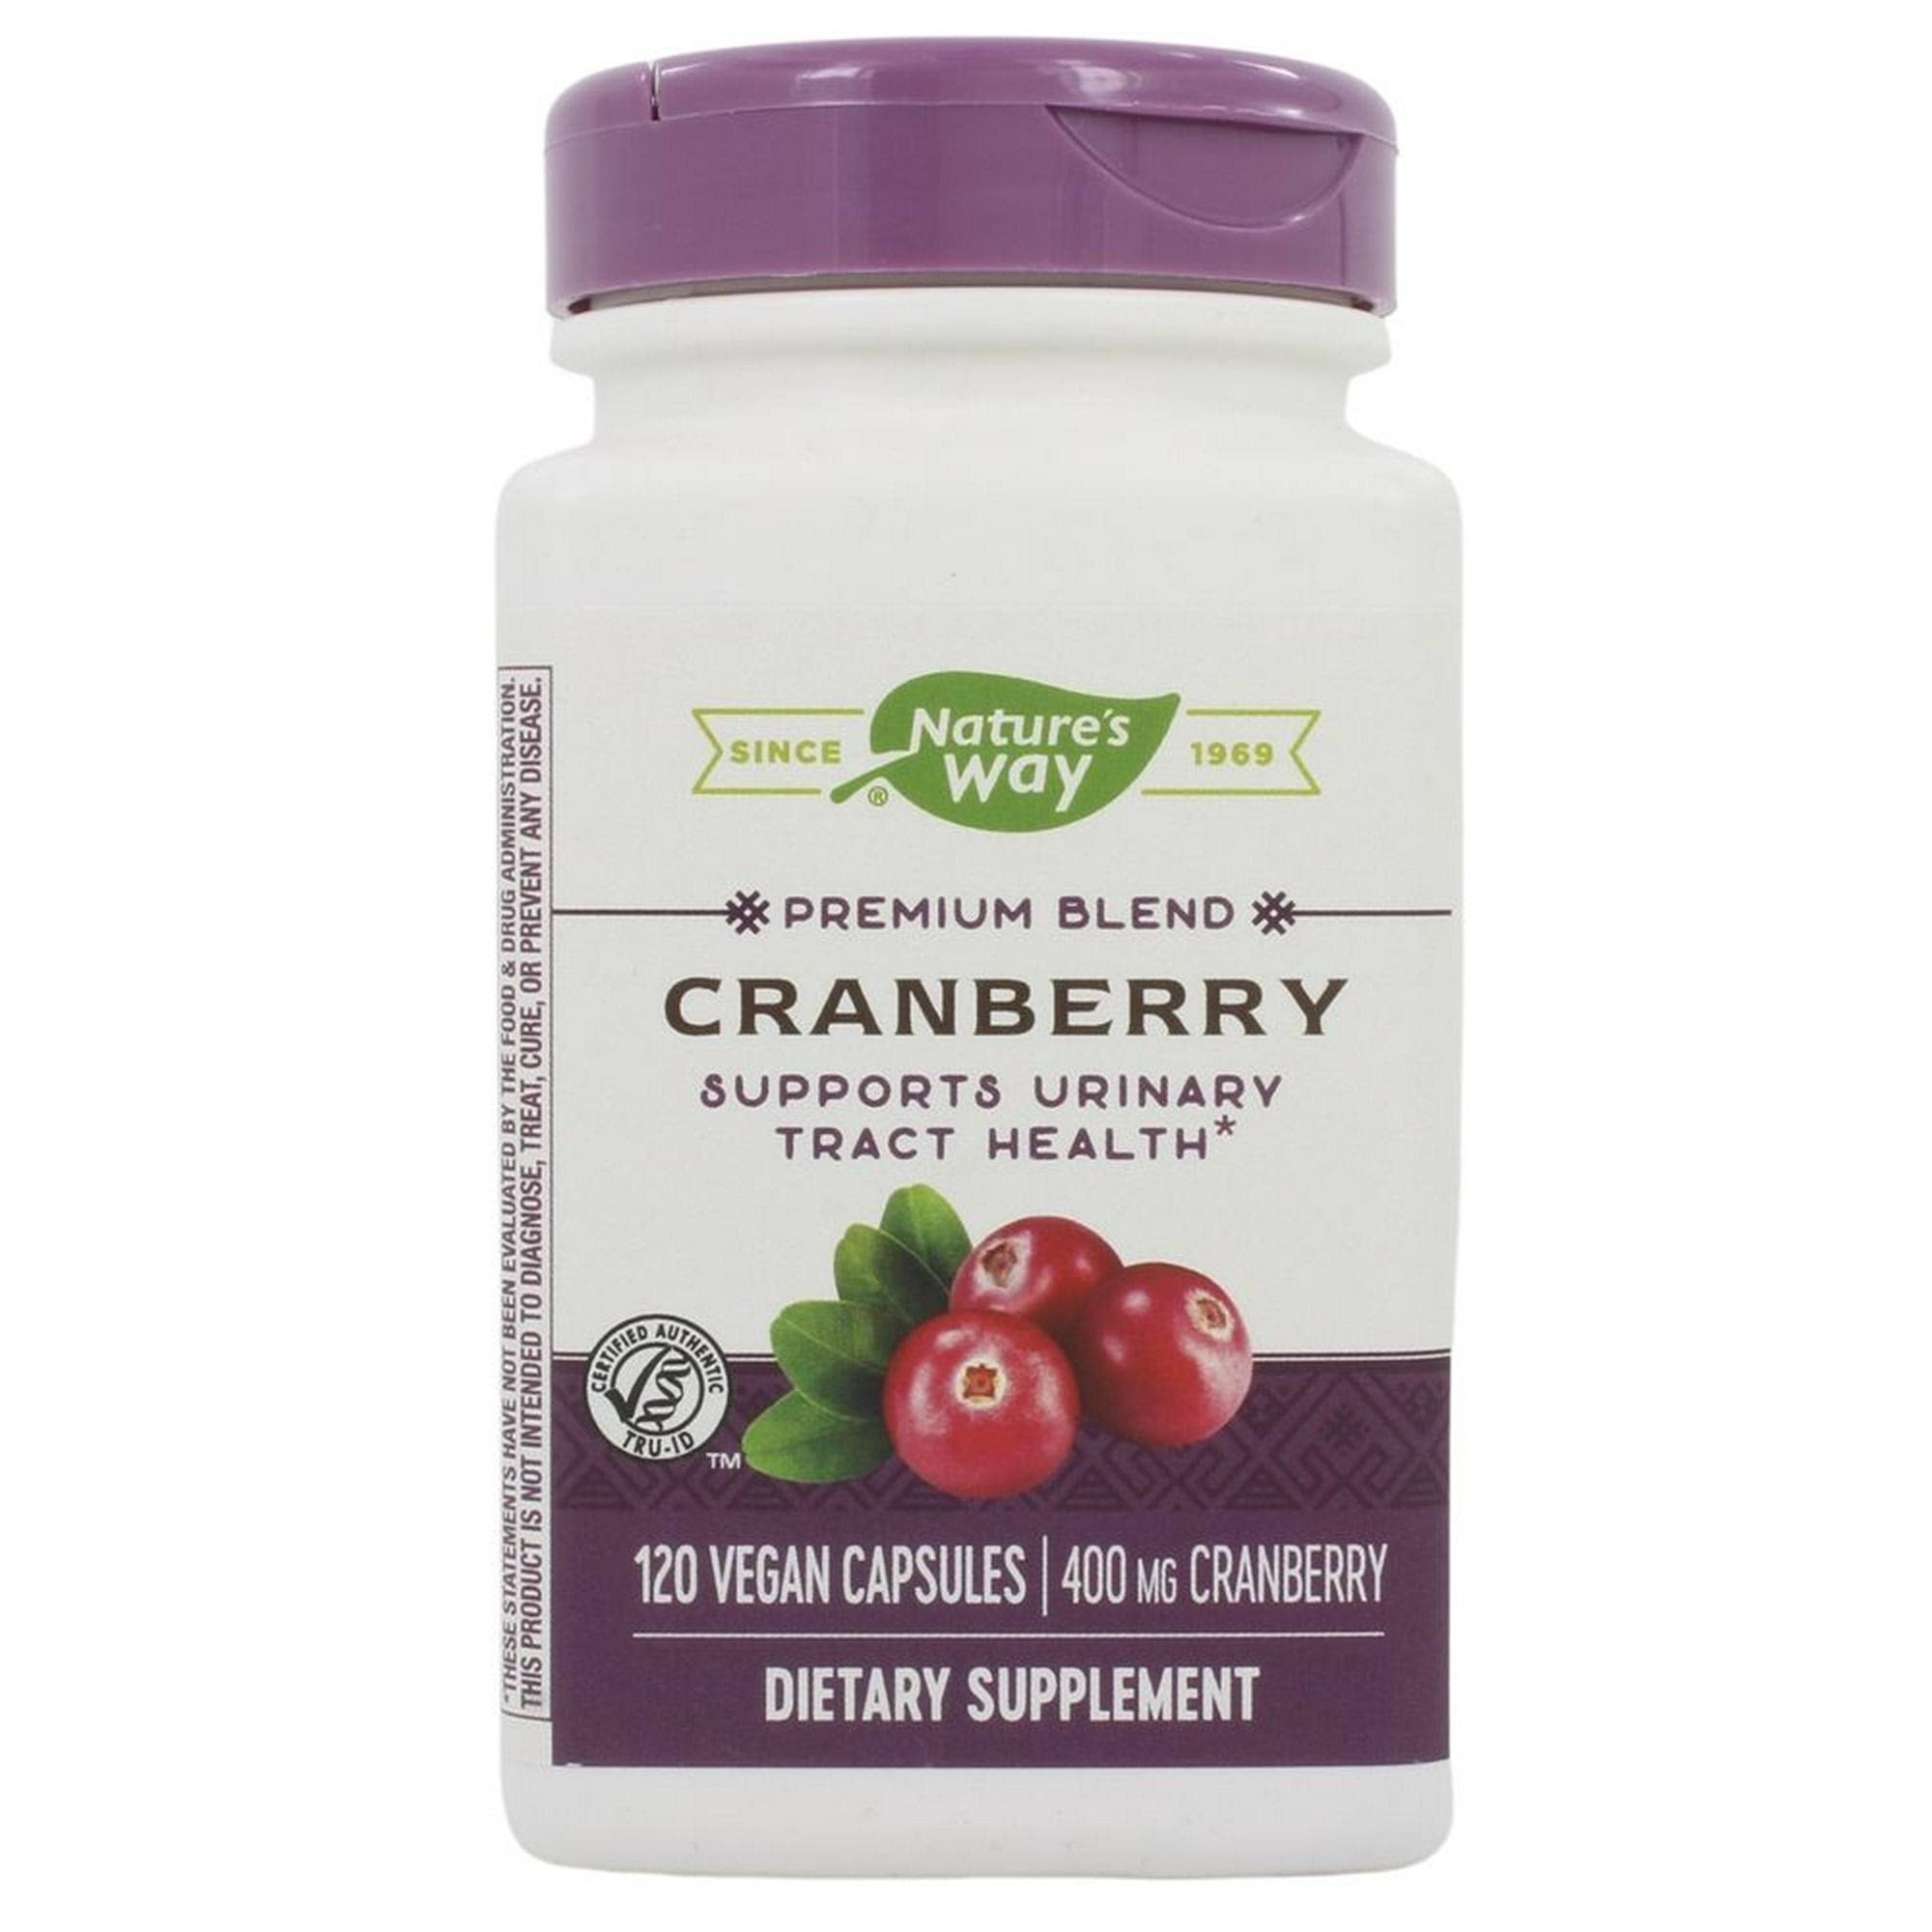 Nature's Way Cranberry Standardized – 120 VCapsules